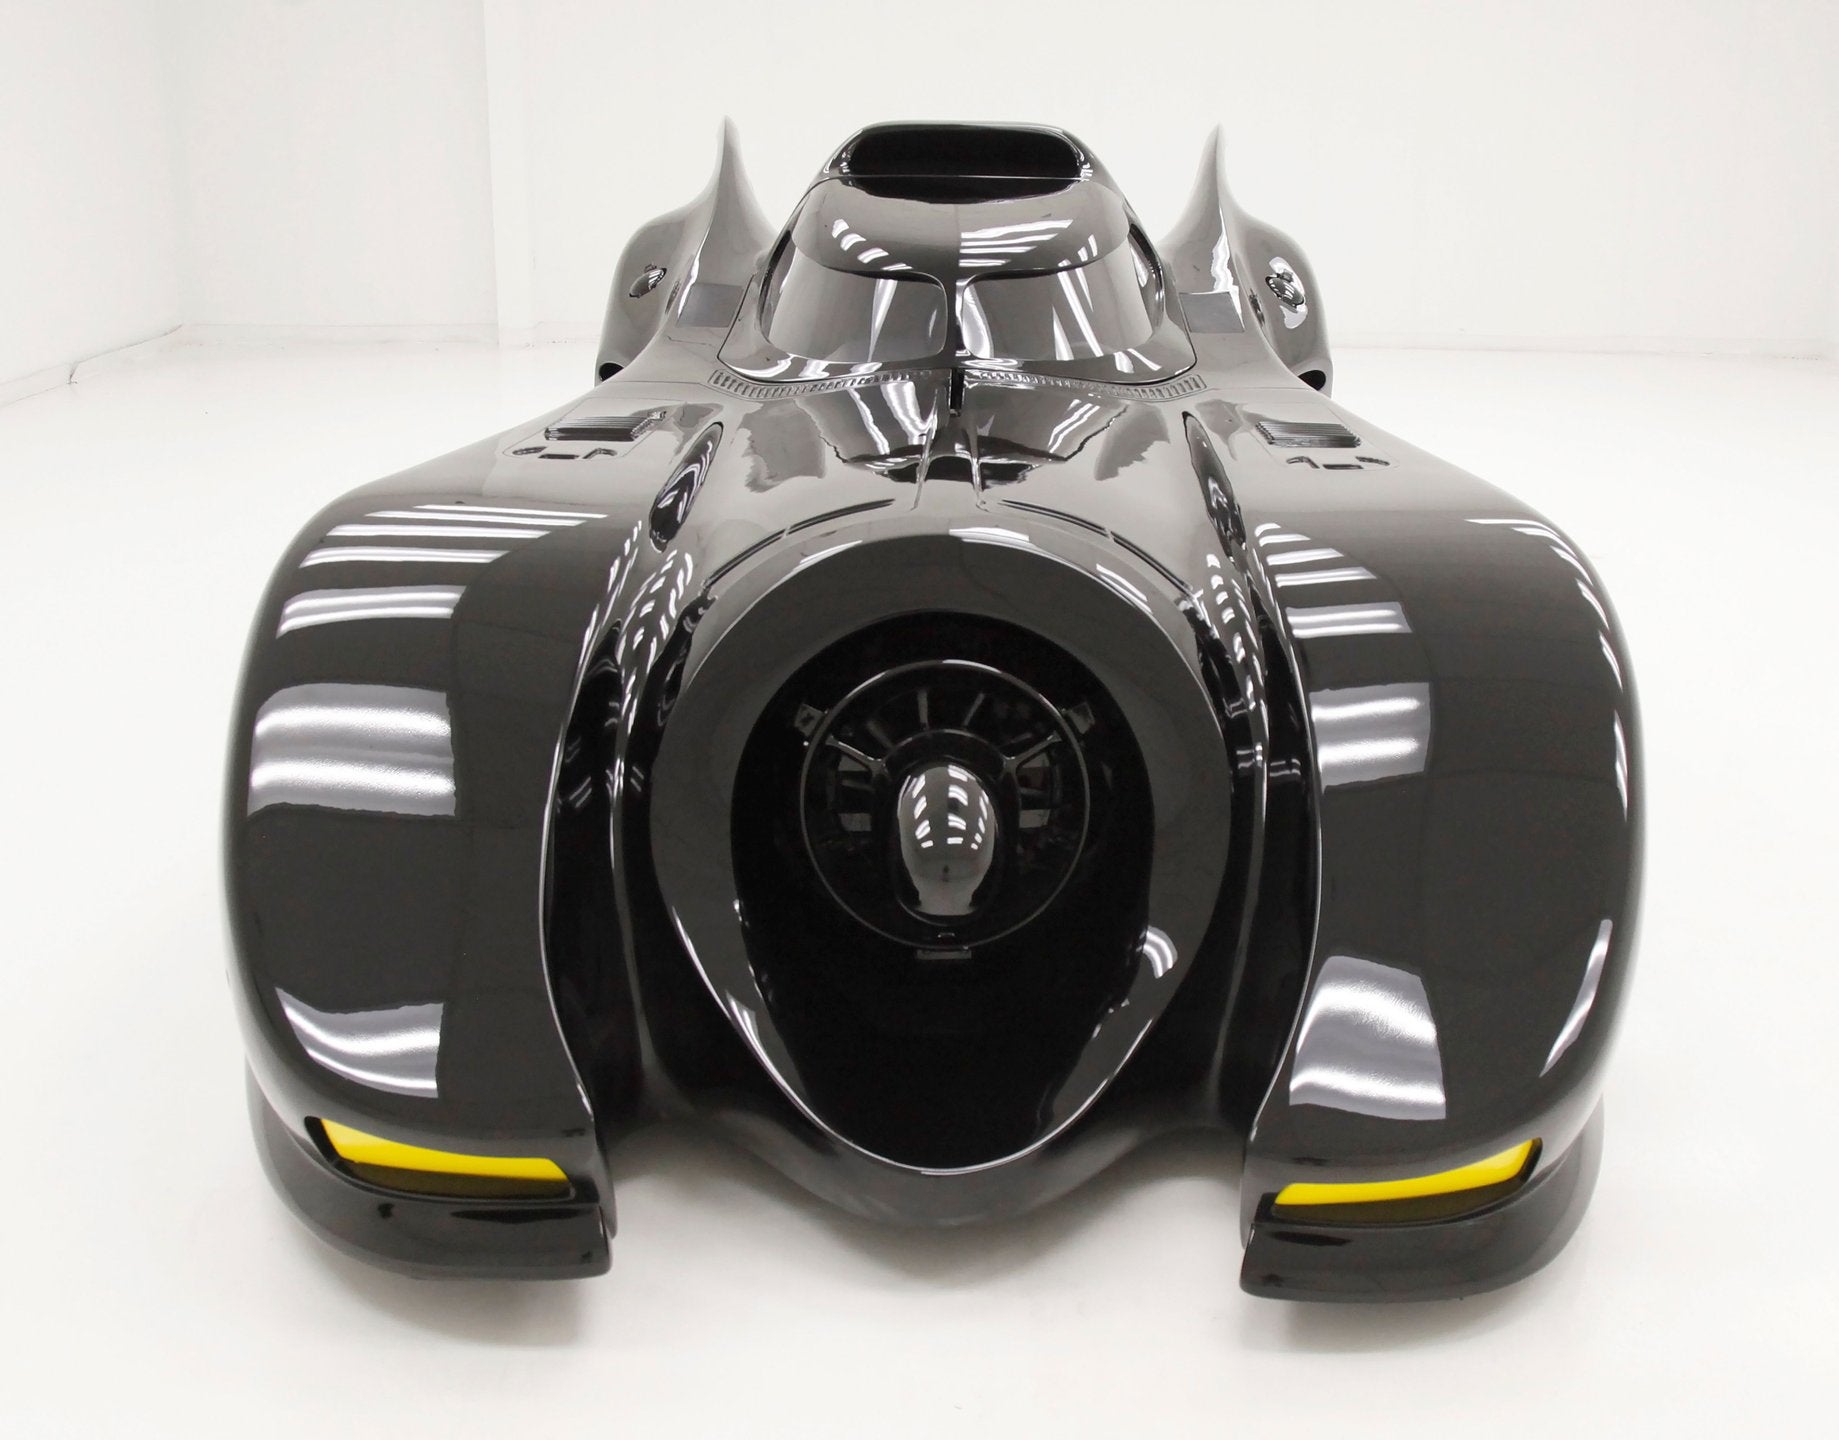 You Can Buy the Tim Burton Batmobile If You Have $2.26 Million